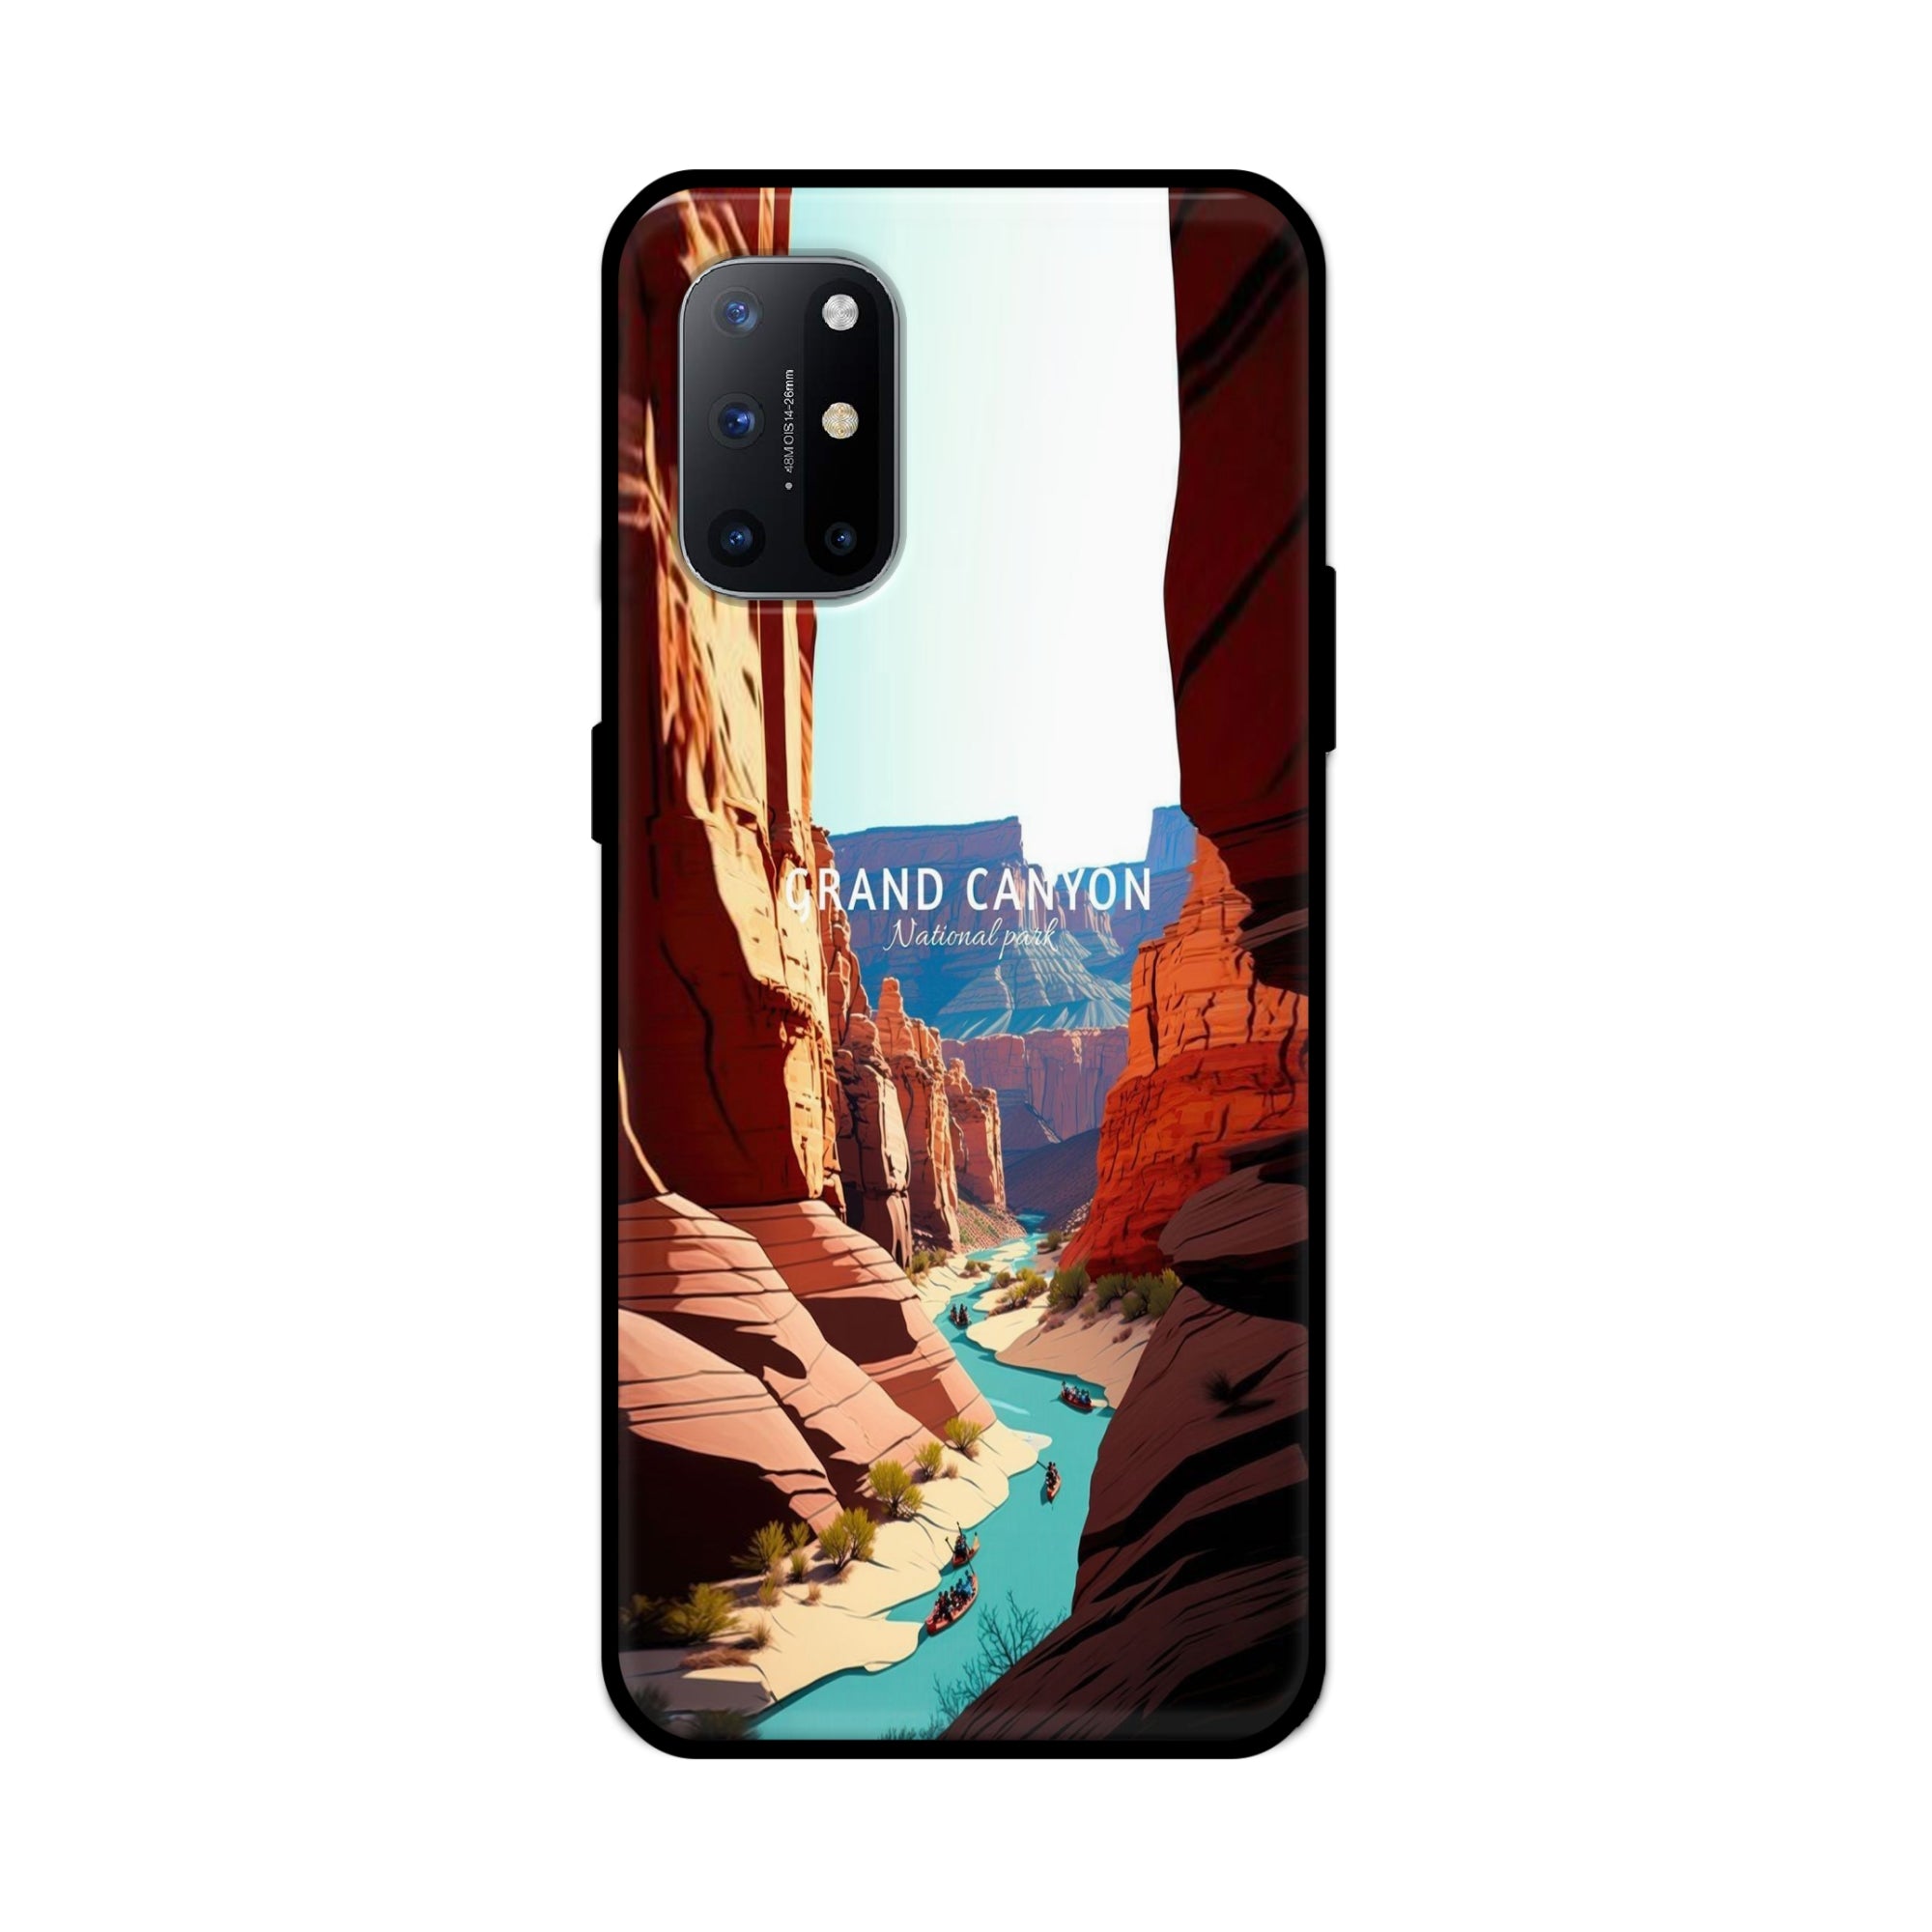 Buy Grand Canyan Metal-Silicon Back Mobile Phone Case/Cover For Oneplus 9R / 8T Online